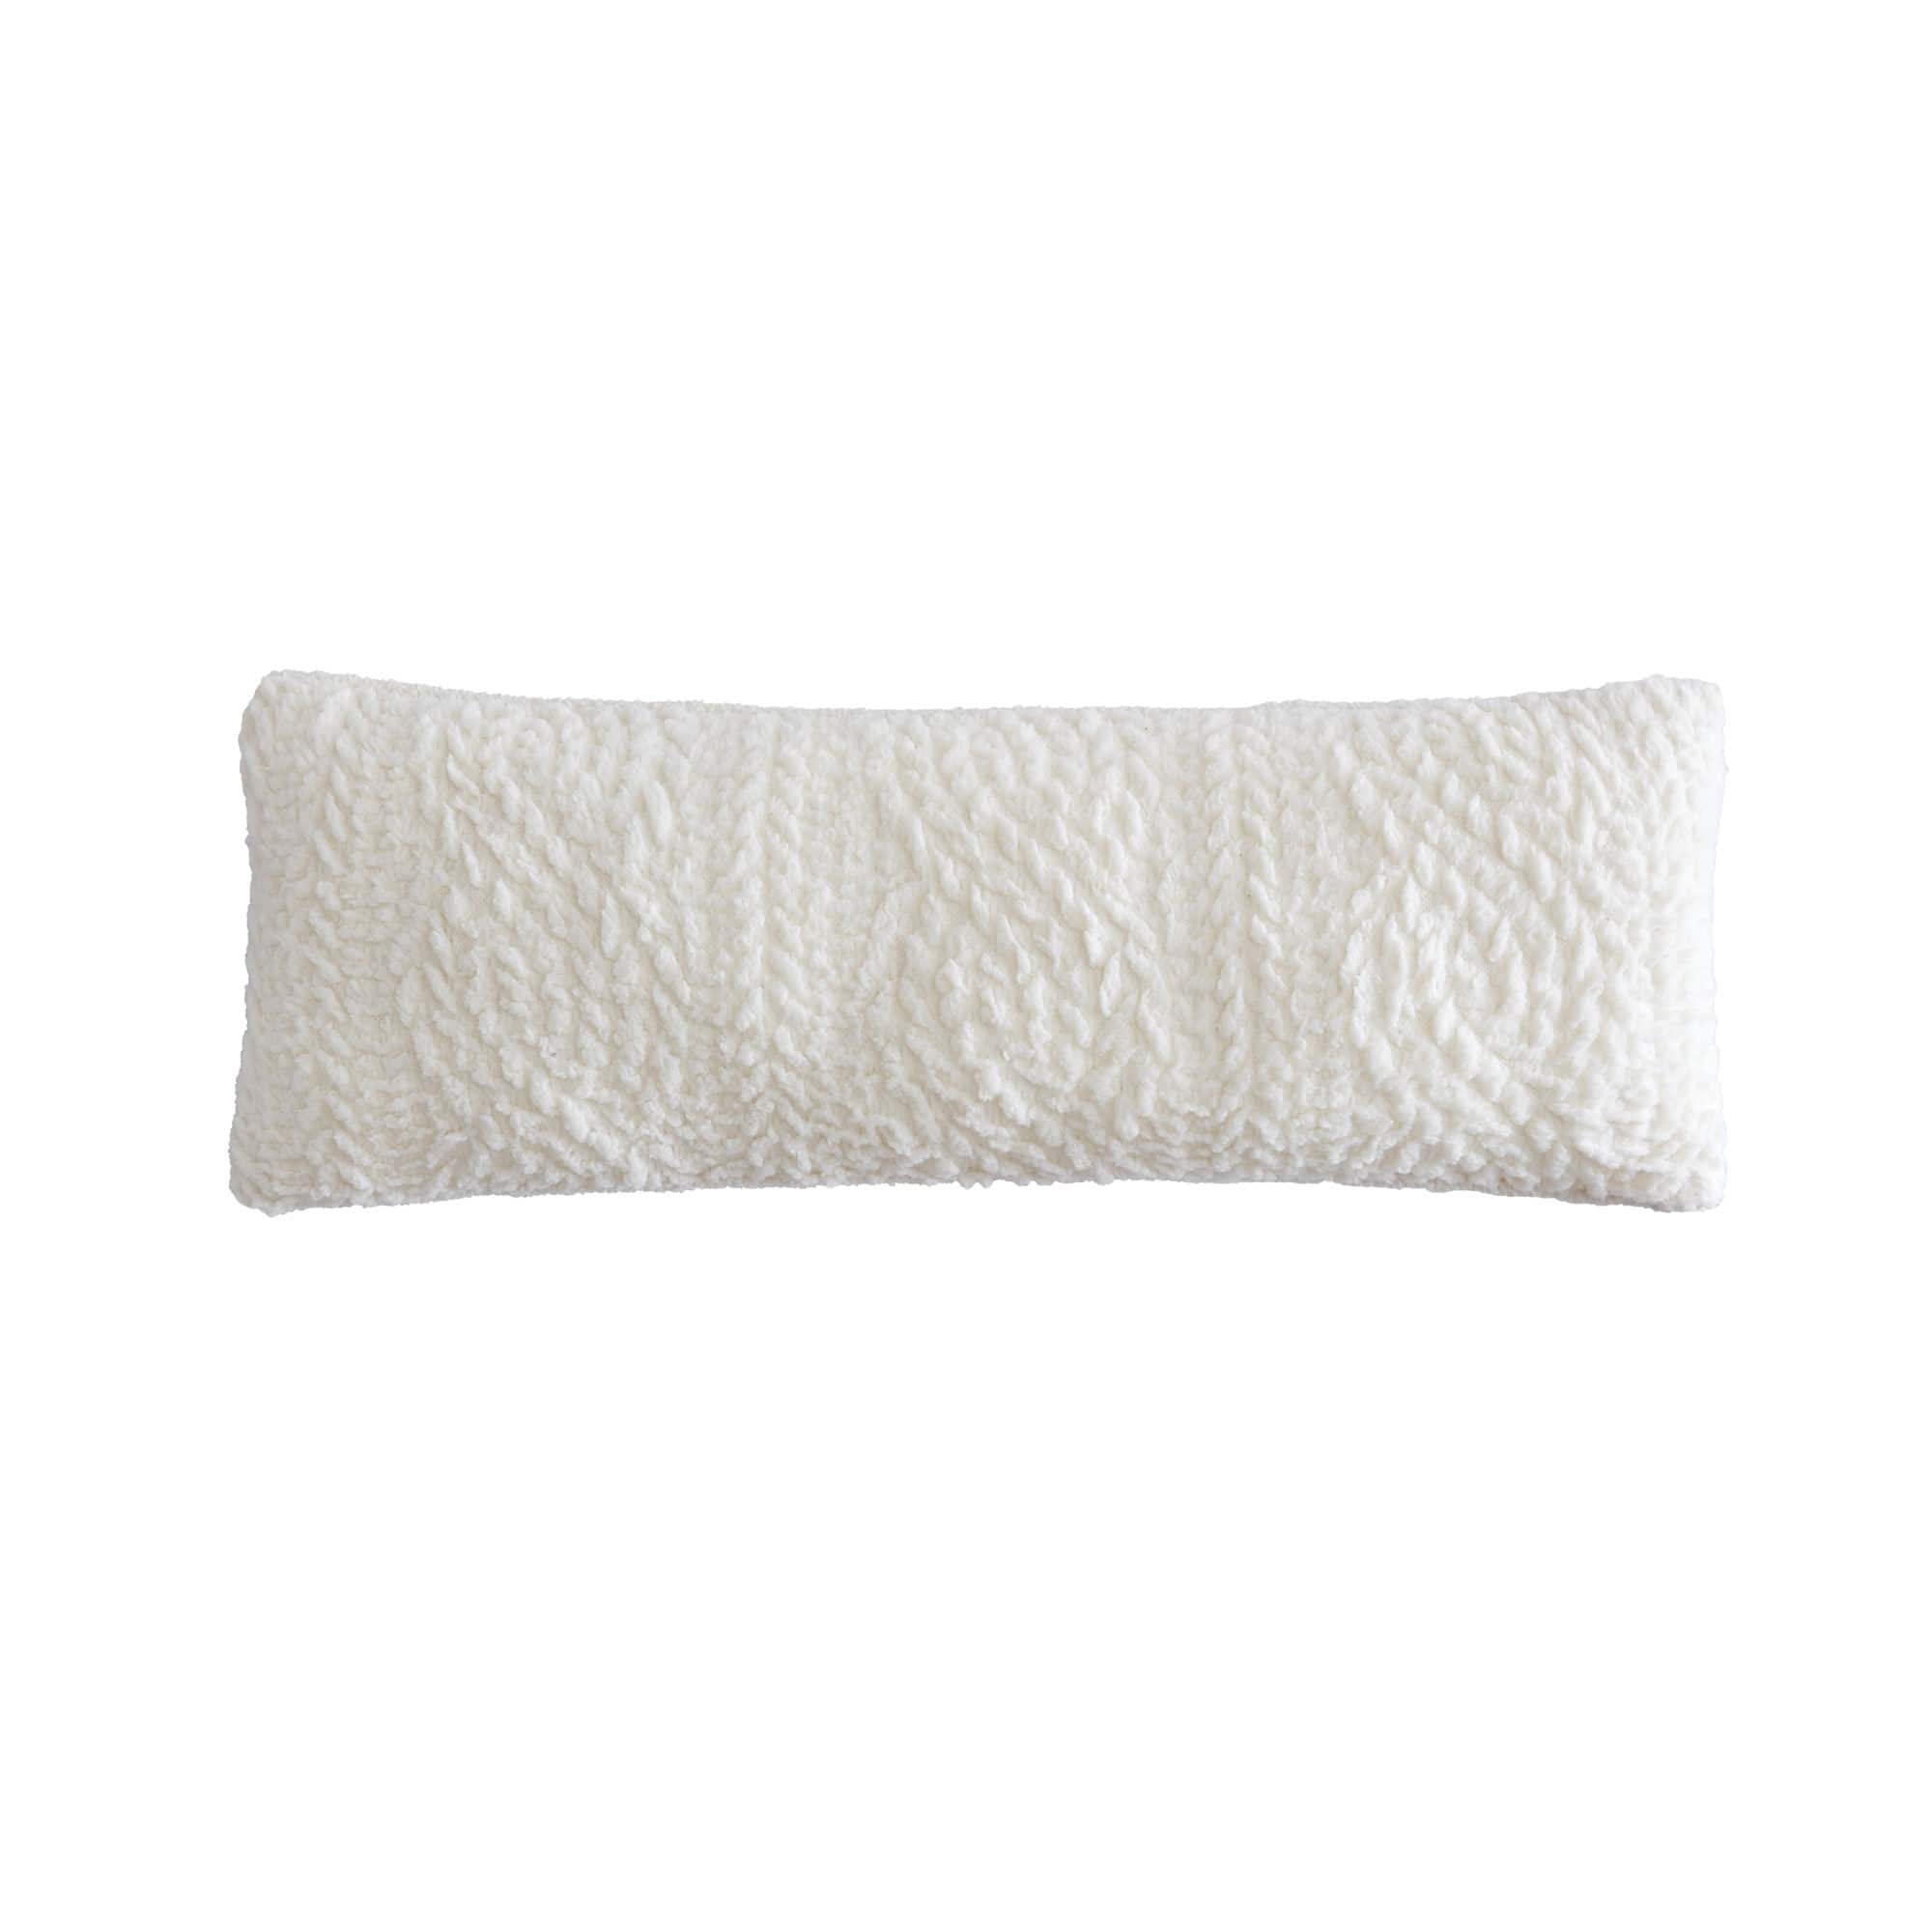 G.H. Bass & Co. Cable Knit Pinsonic Sherpa Decorative Pillow - Ivory ...